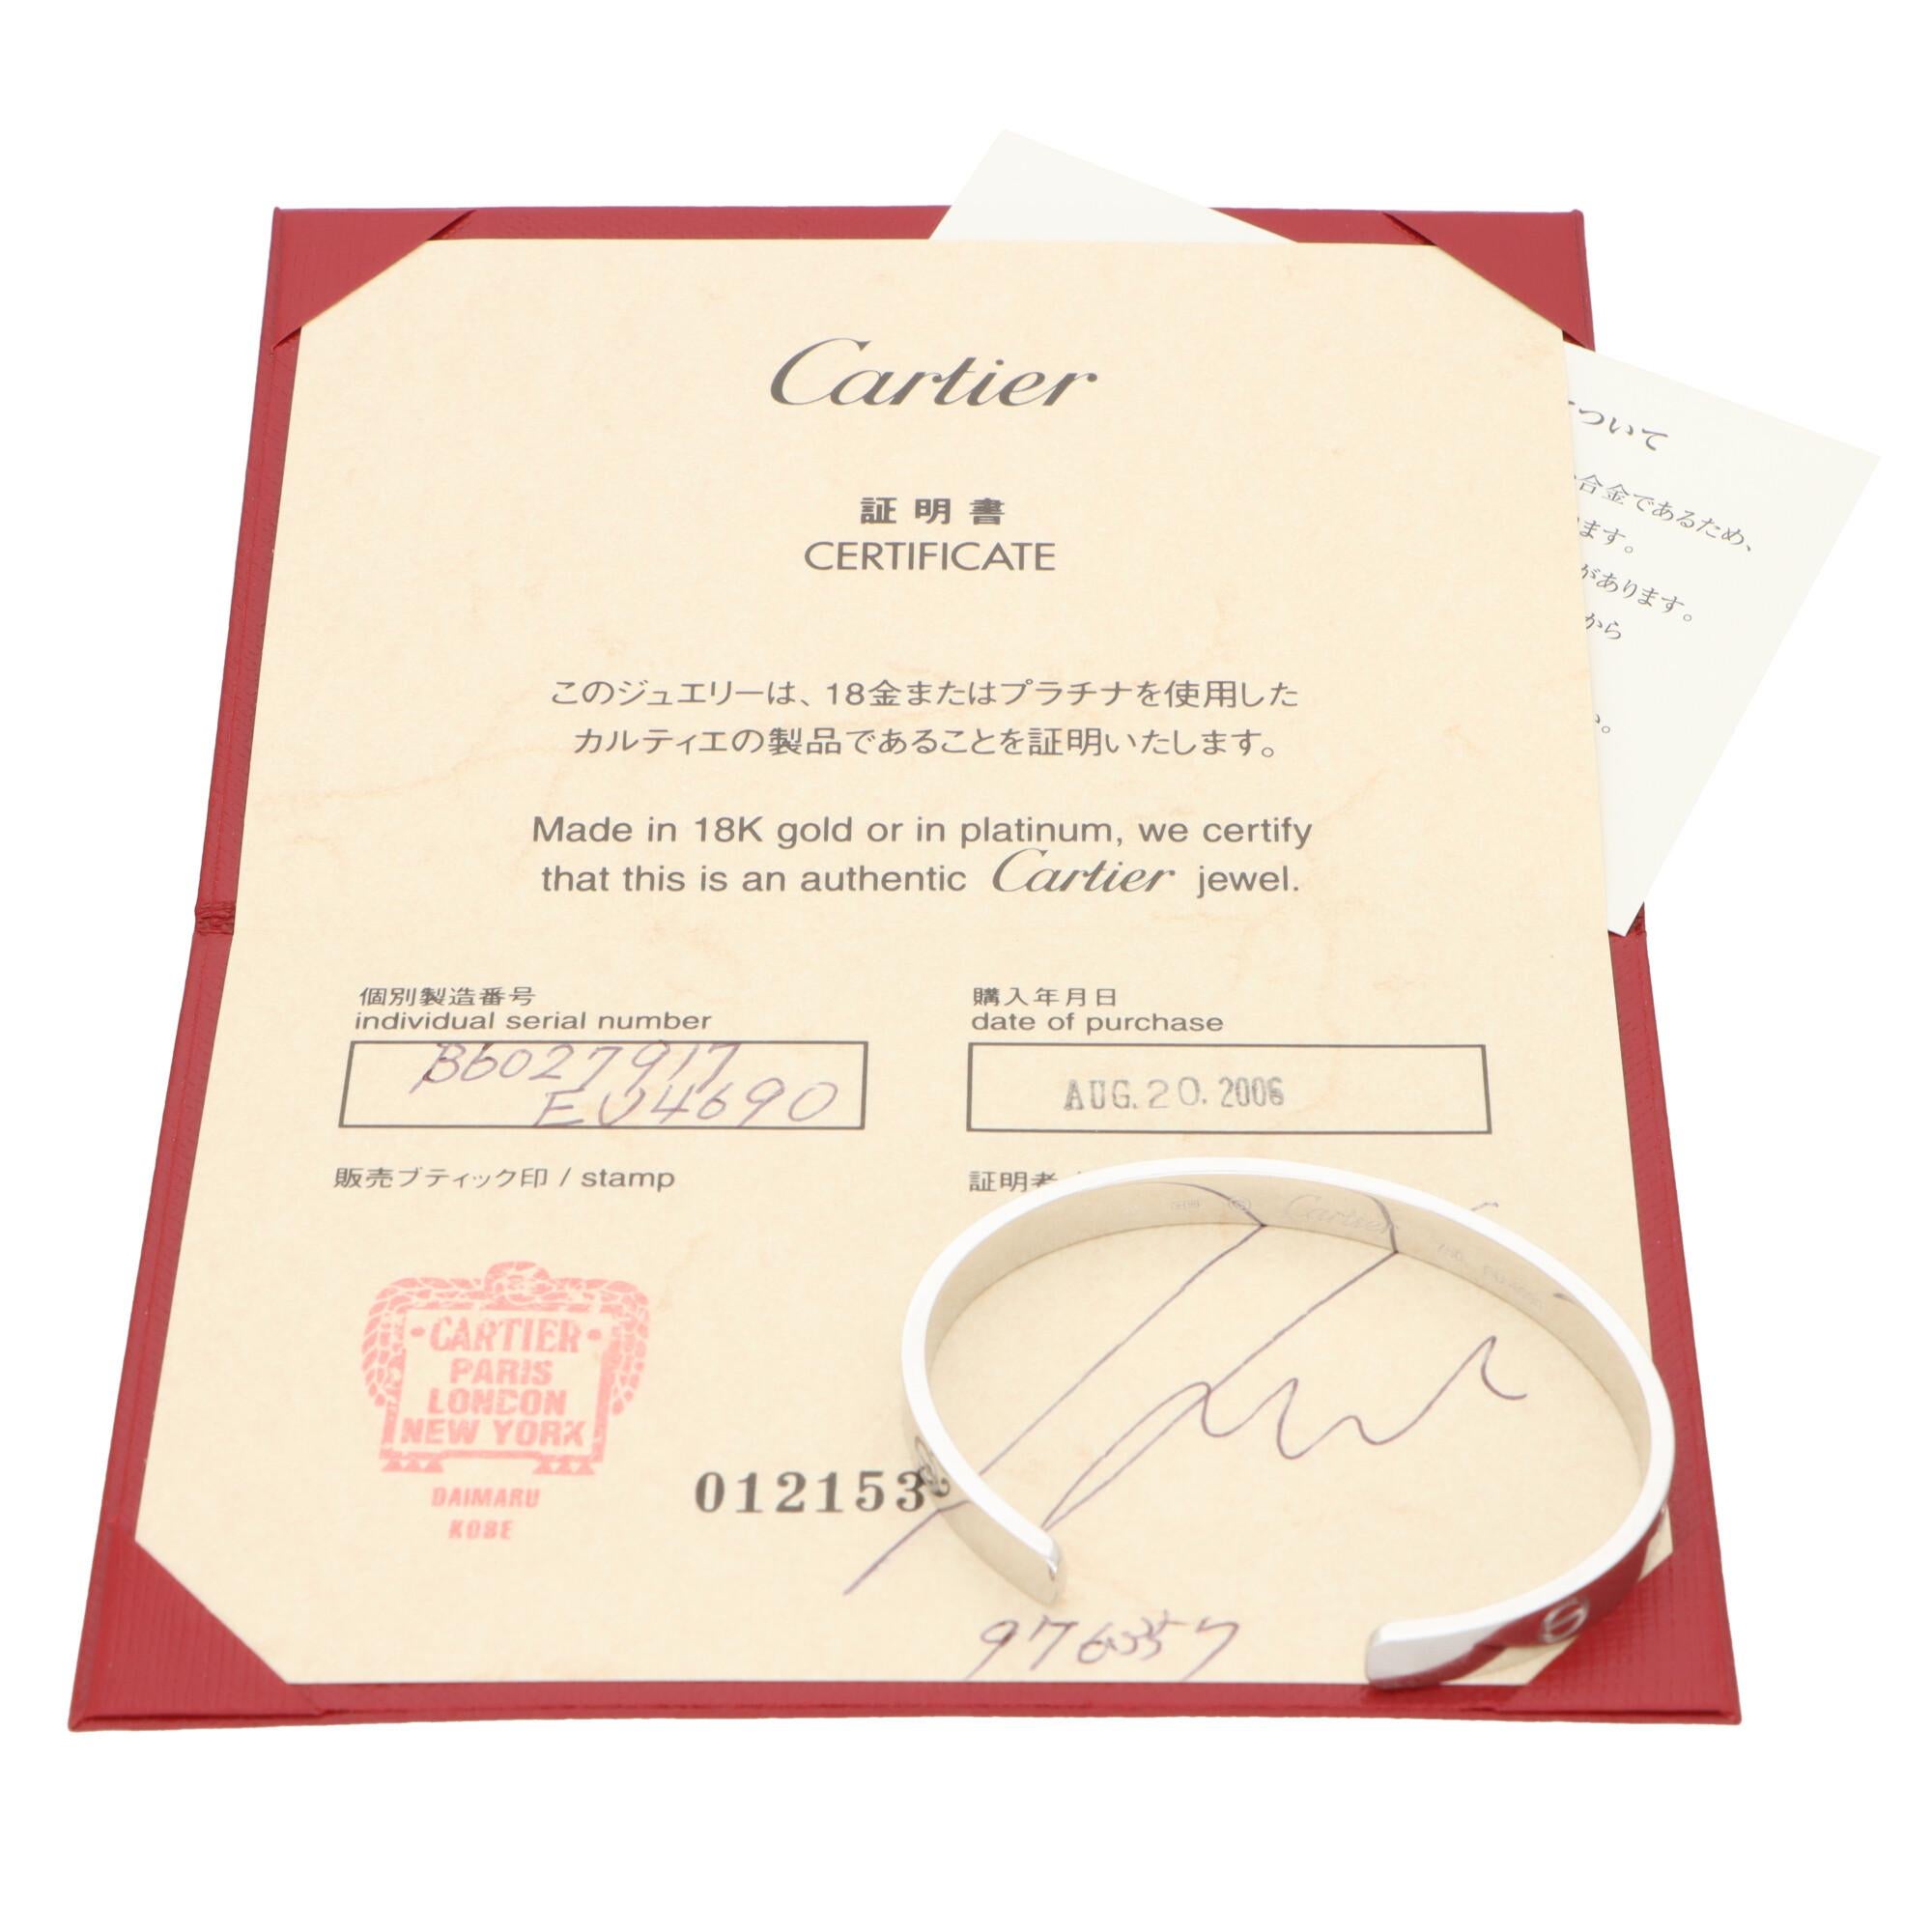 A classic Cartier Love U torque bangle set in 18k white gold.

The Love collection is a firm favourite of many mainly due to the simple, beautiful and elegant design. The bangle is composed of a 6-millimetre band with nine individual nail motifs